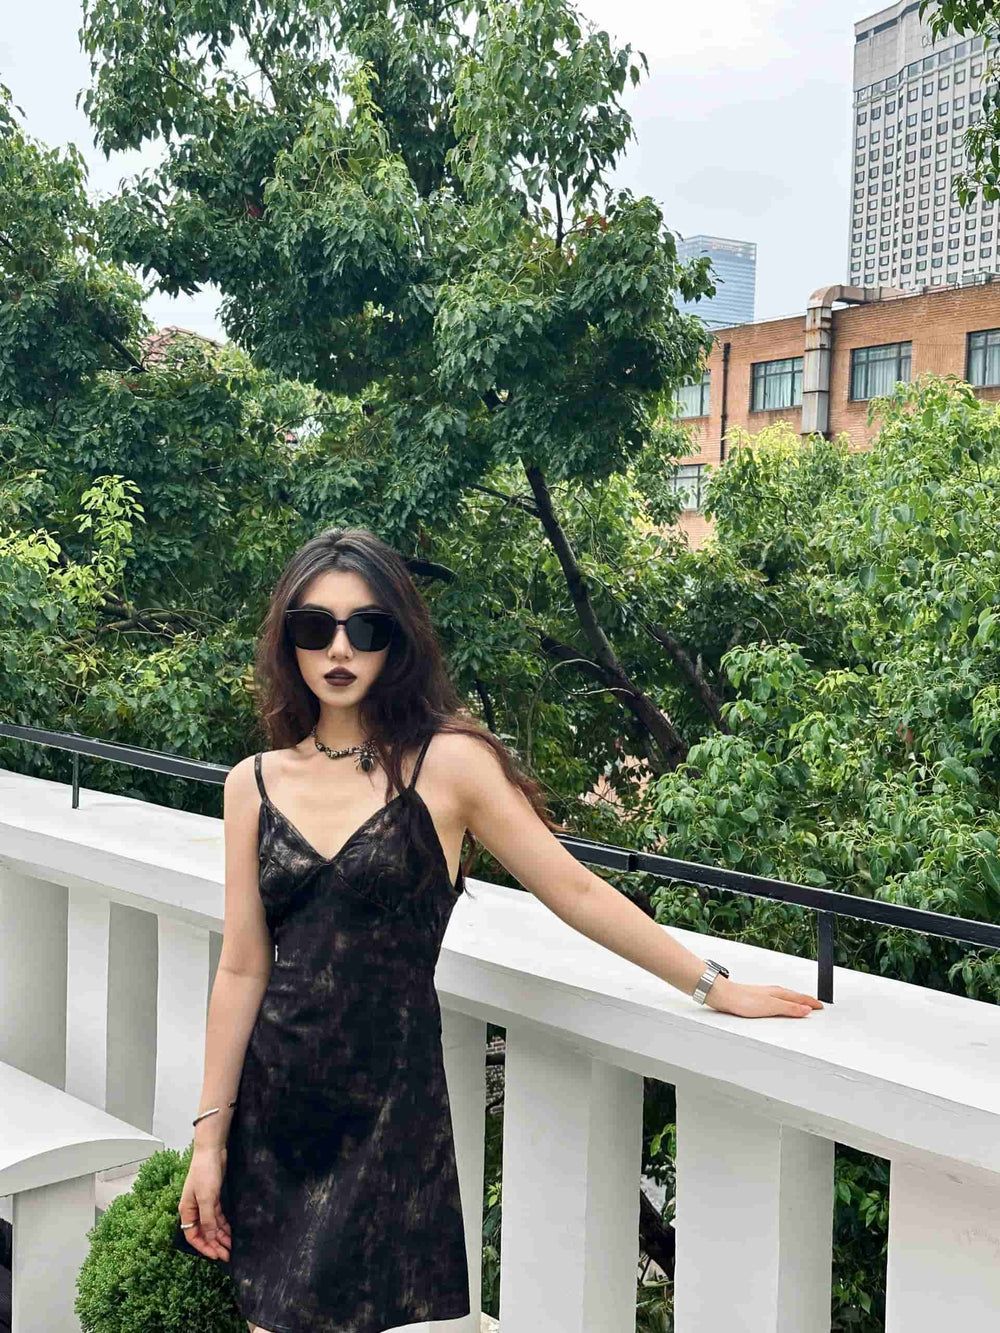 A stylish woman in a black dress and trendy sunglasses striking a pose on a balcony.